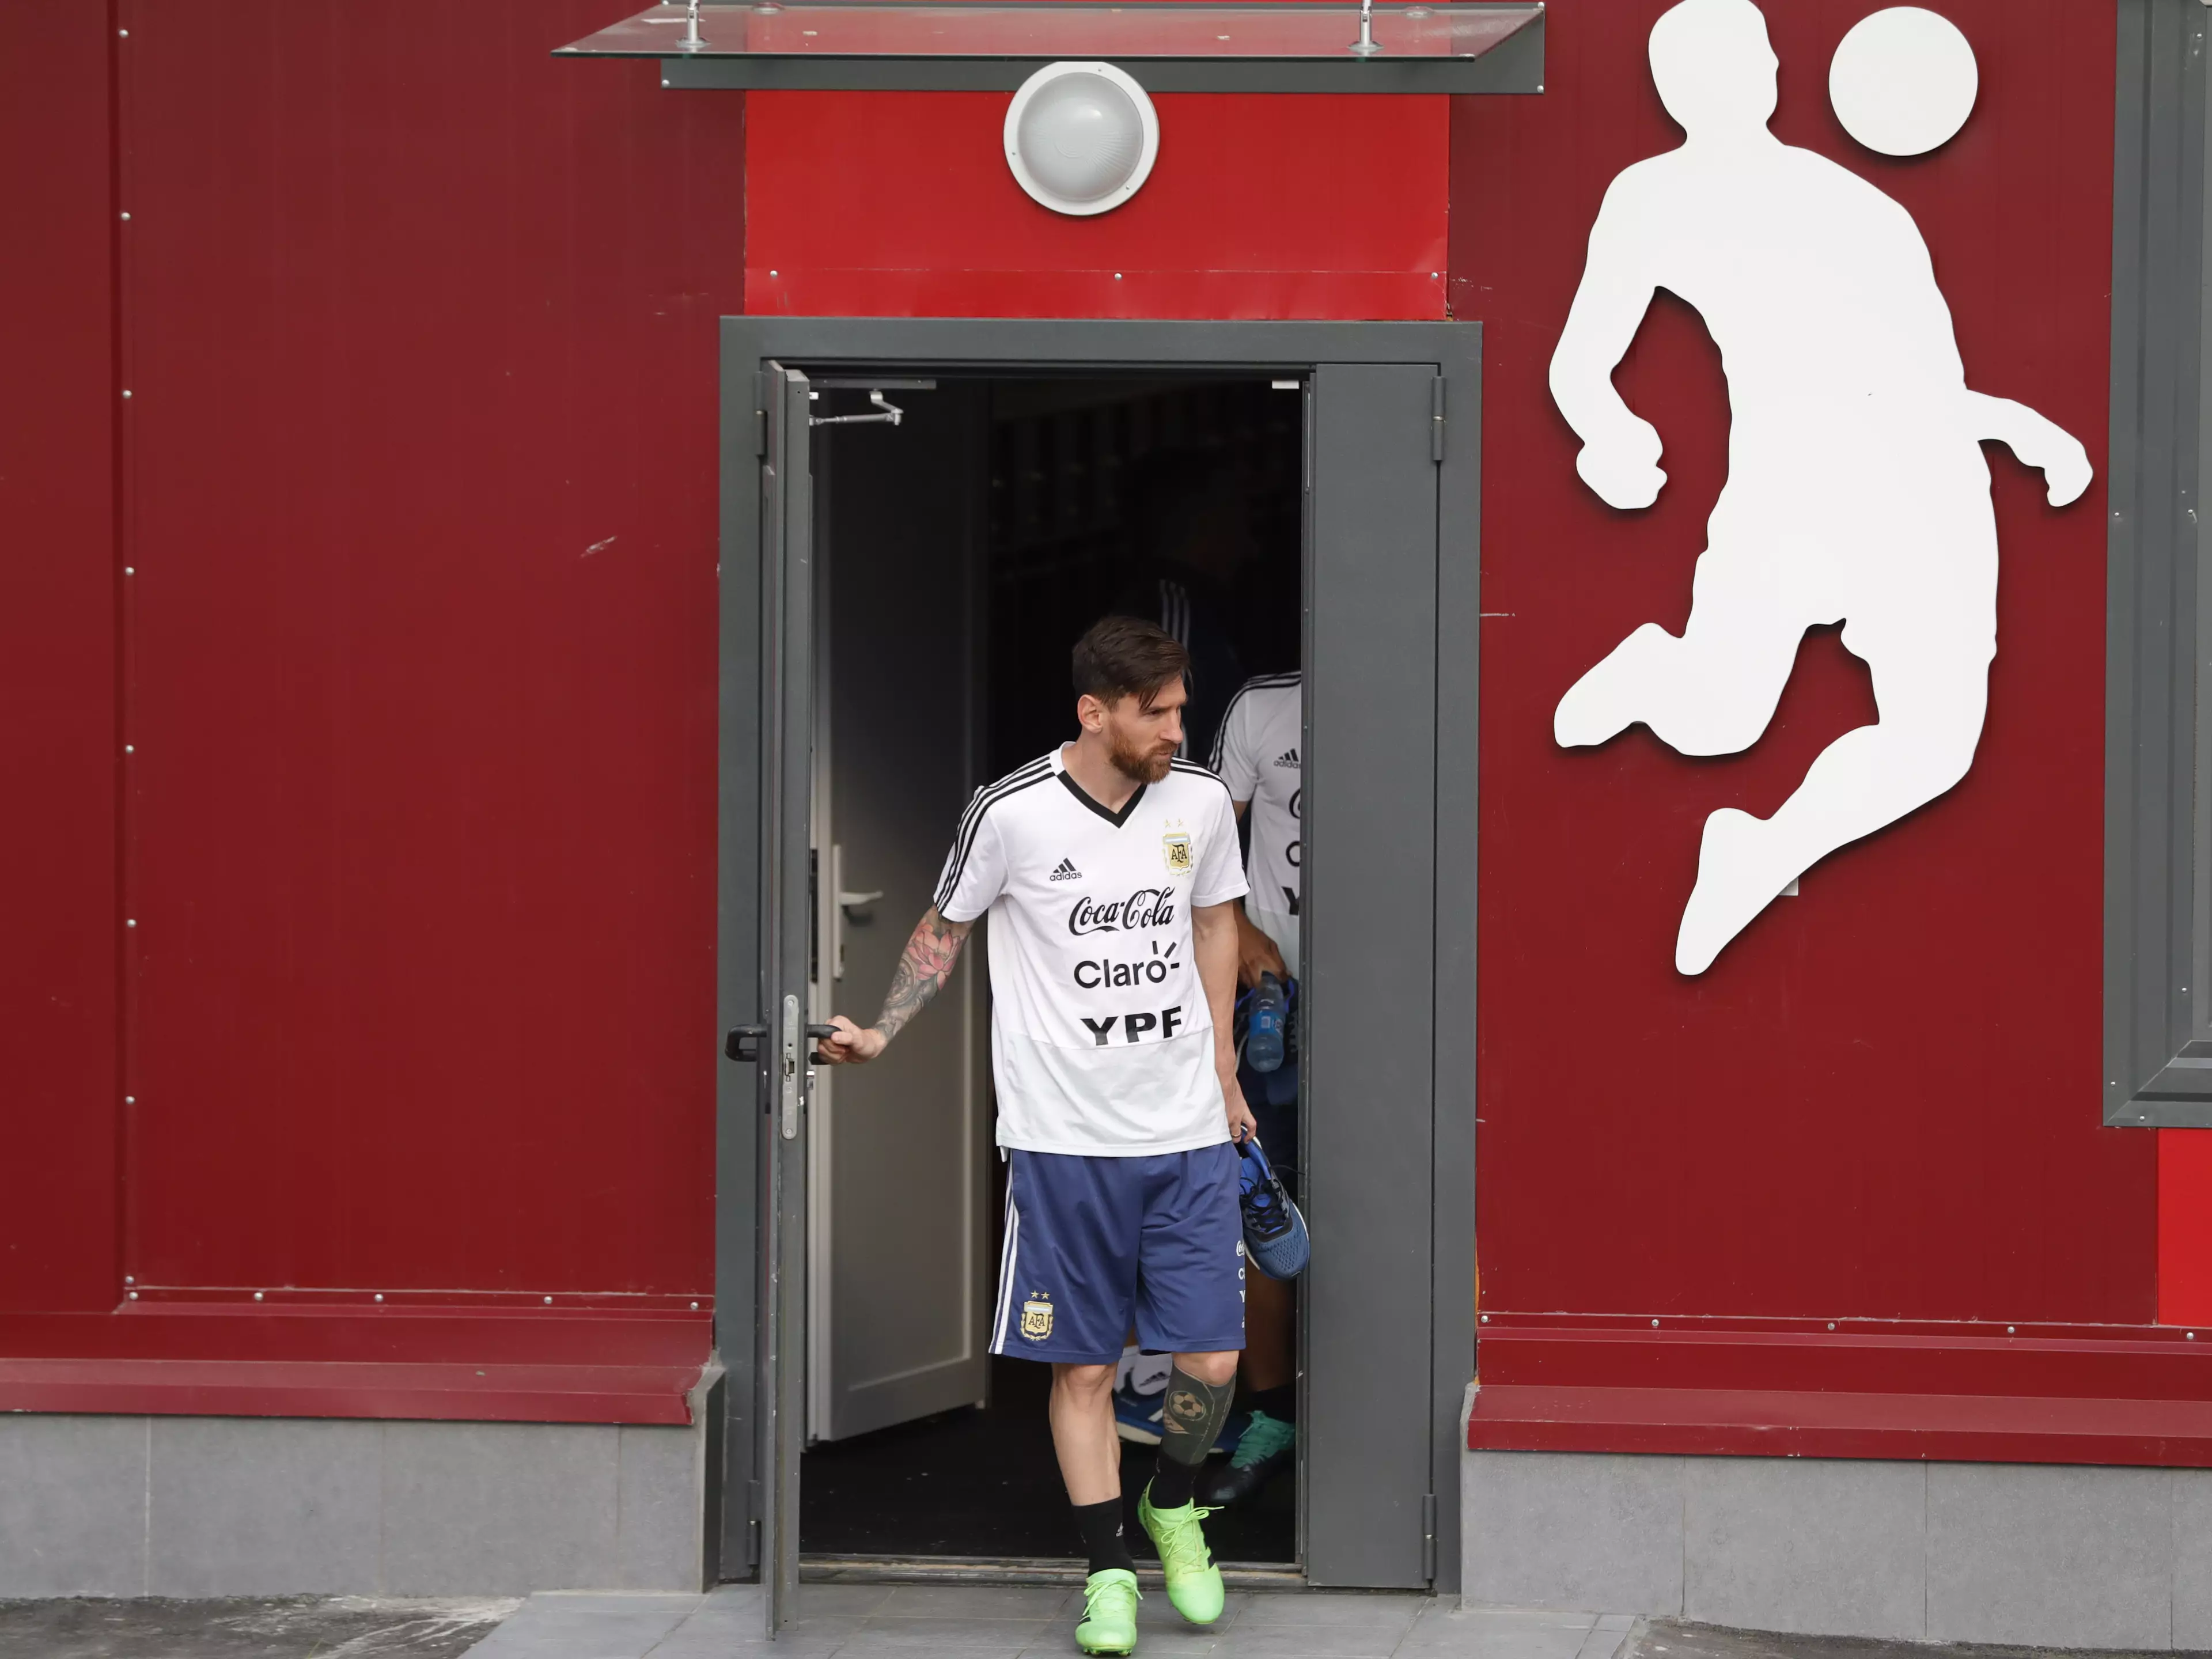 Messi at Argentina's training camp. Image: PA Images